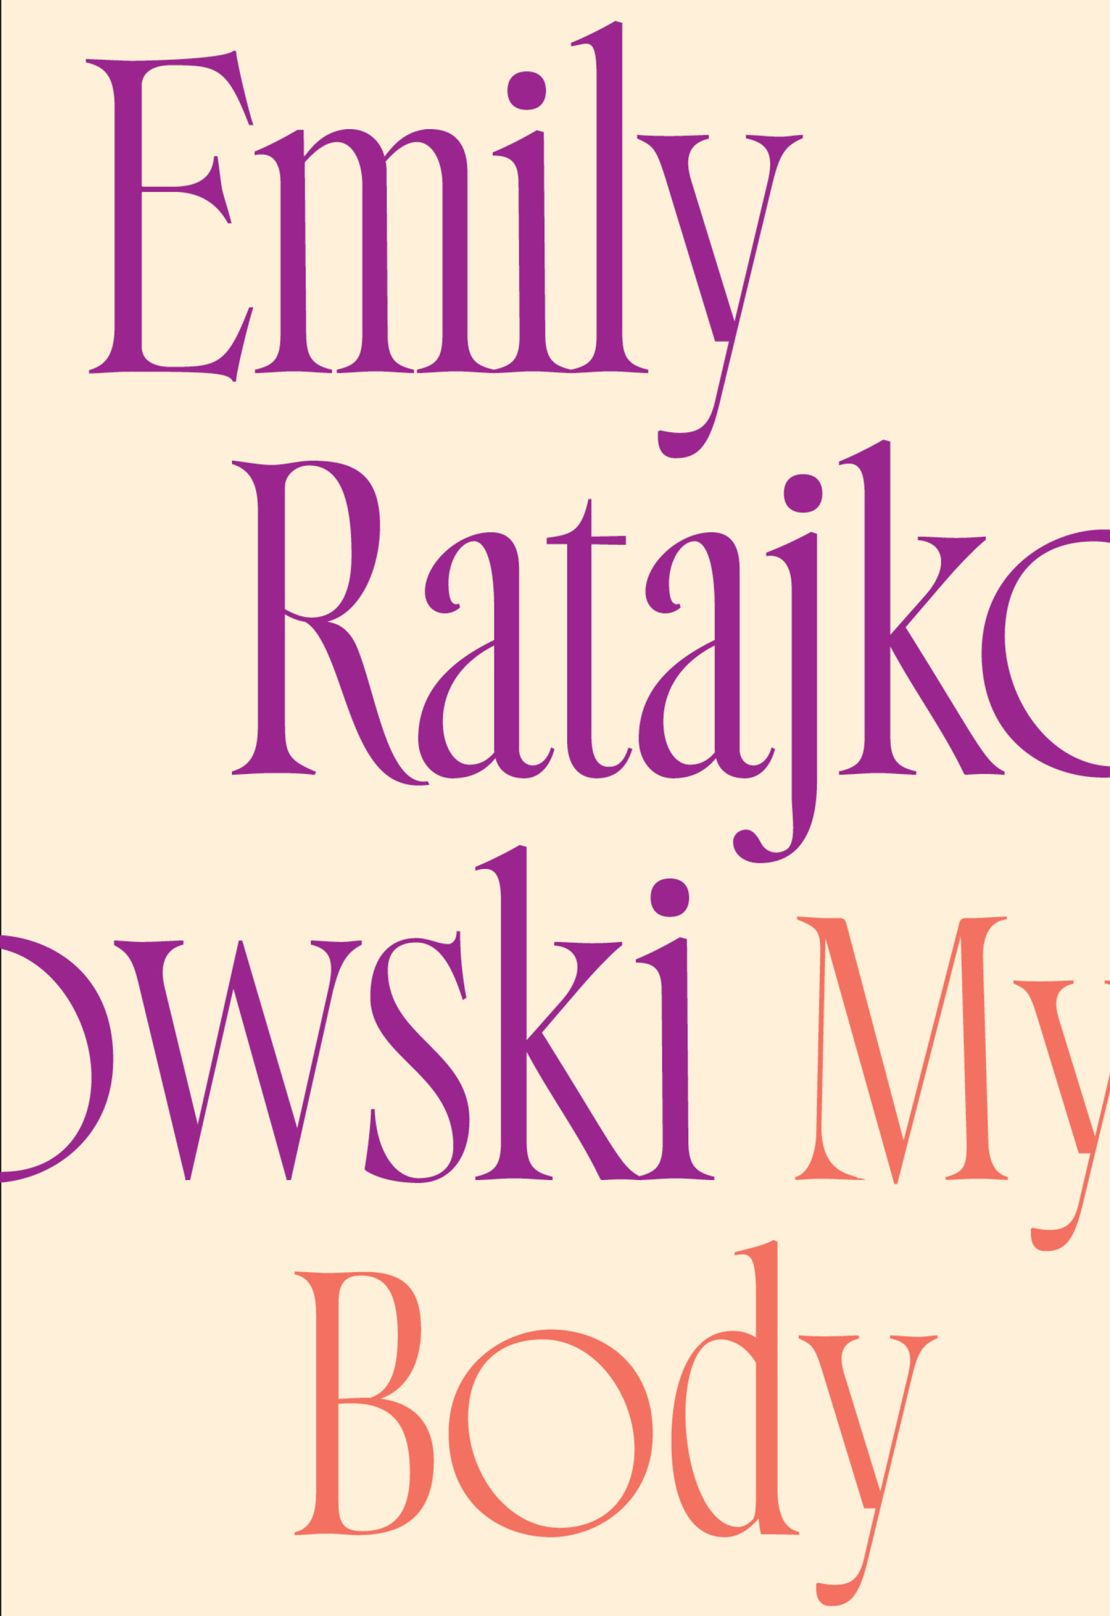 "My Body" by Emily Ratajkowski is out Nov 9 and published by Metropolitan Books.